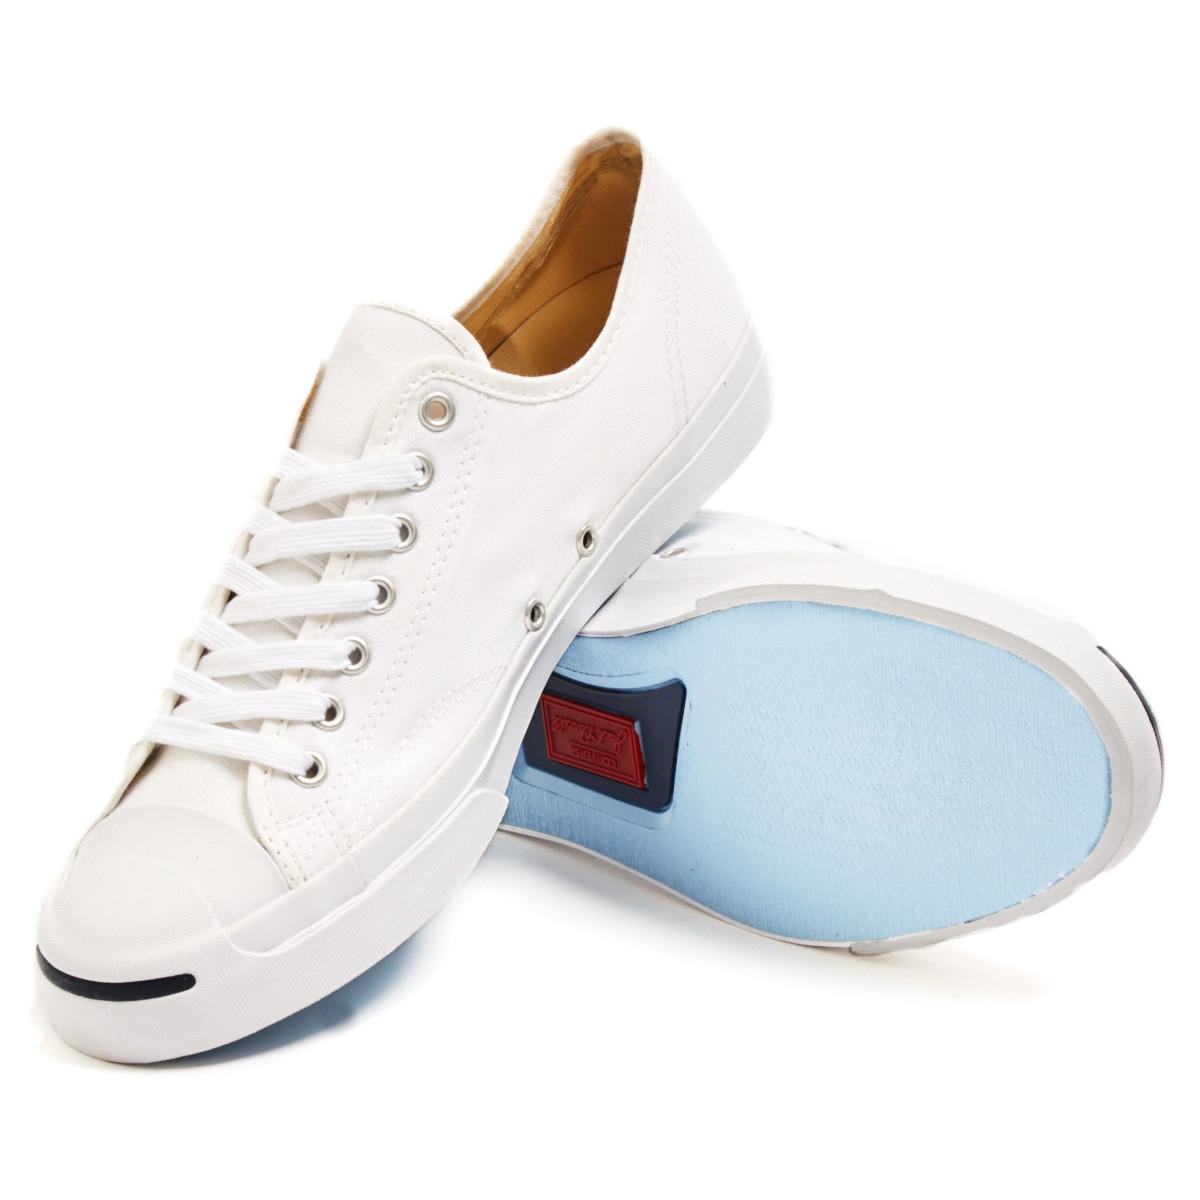 Converse Canvas Jack Purcell in White for Men - Lyst